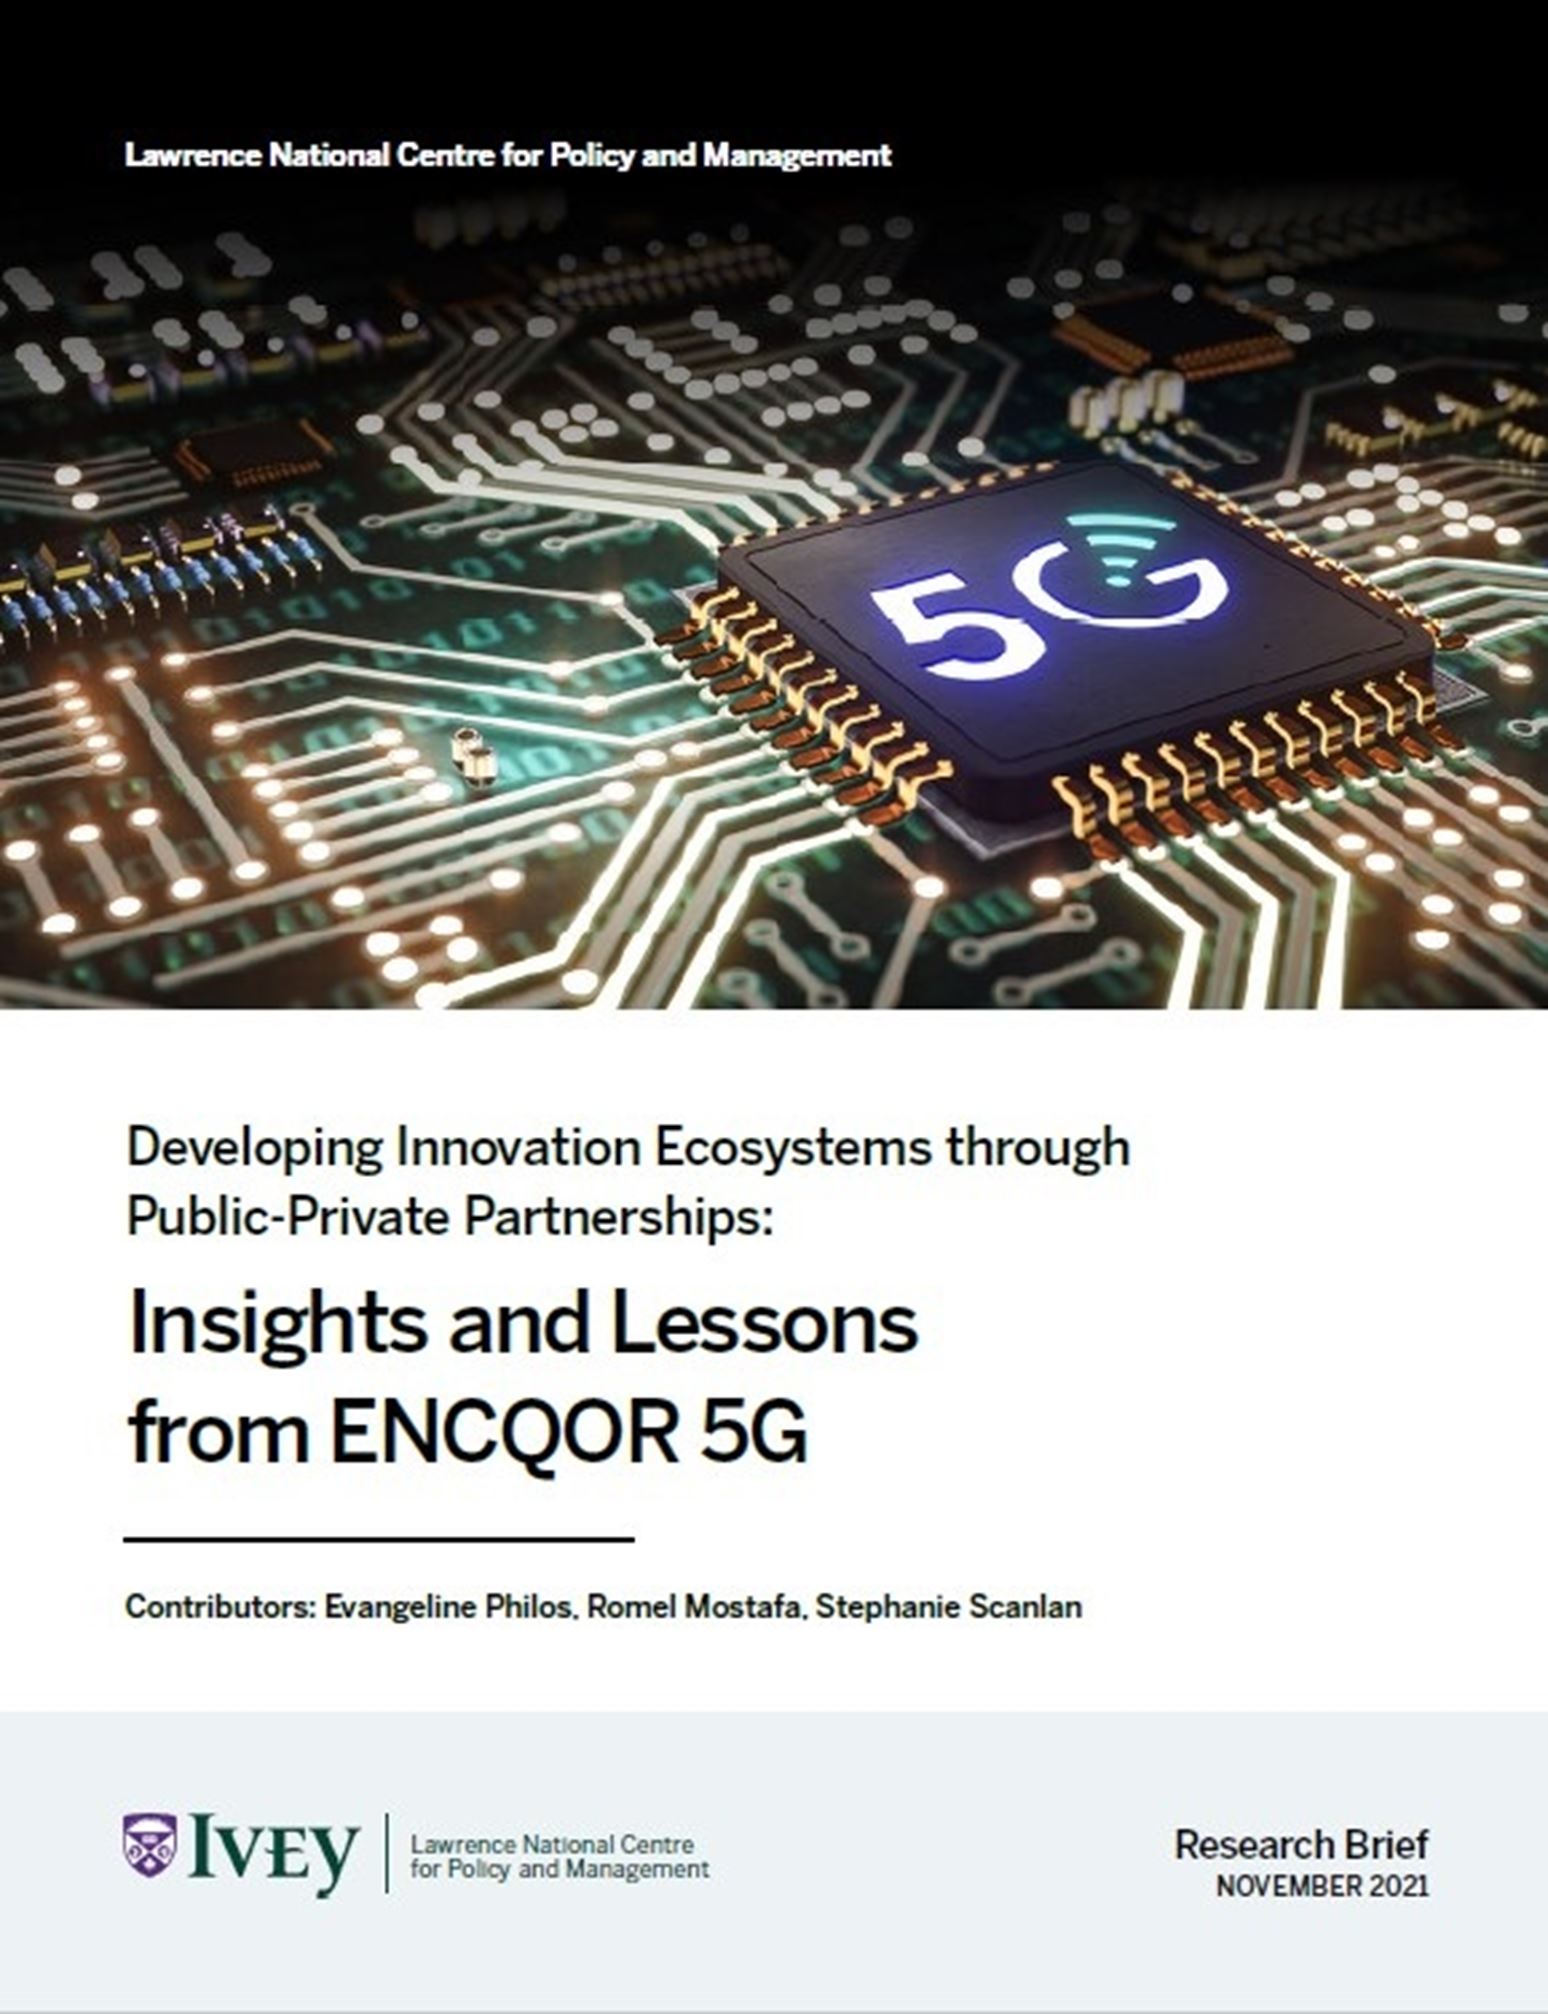 Developing Innovation Ecosystems through Public-Private Partnerships: Insights and Lessons from ENCQOR 5G